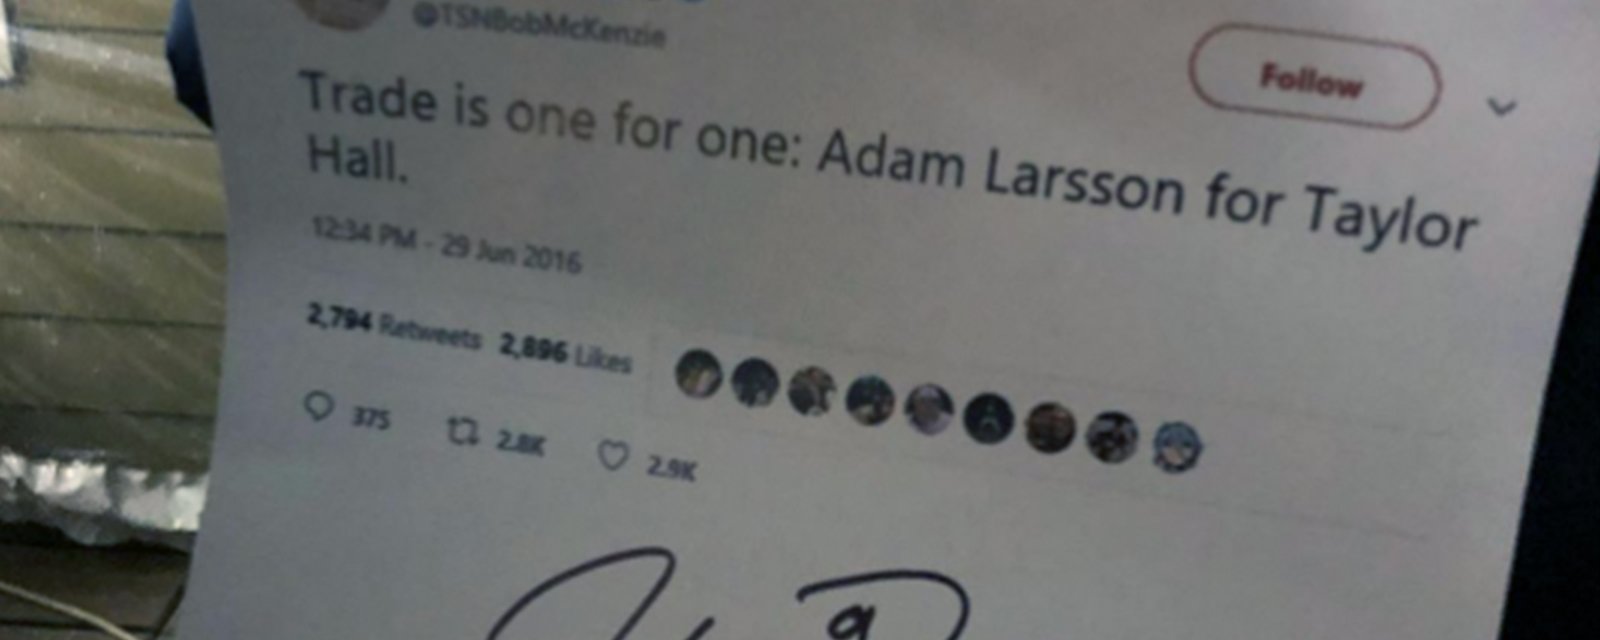 Taylor Hall has hilarious encounter with fan, signs a printed tweet of Hall for Larsson trade